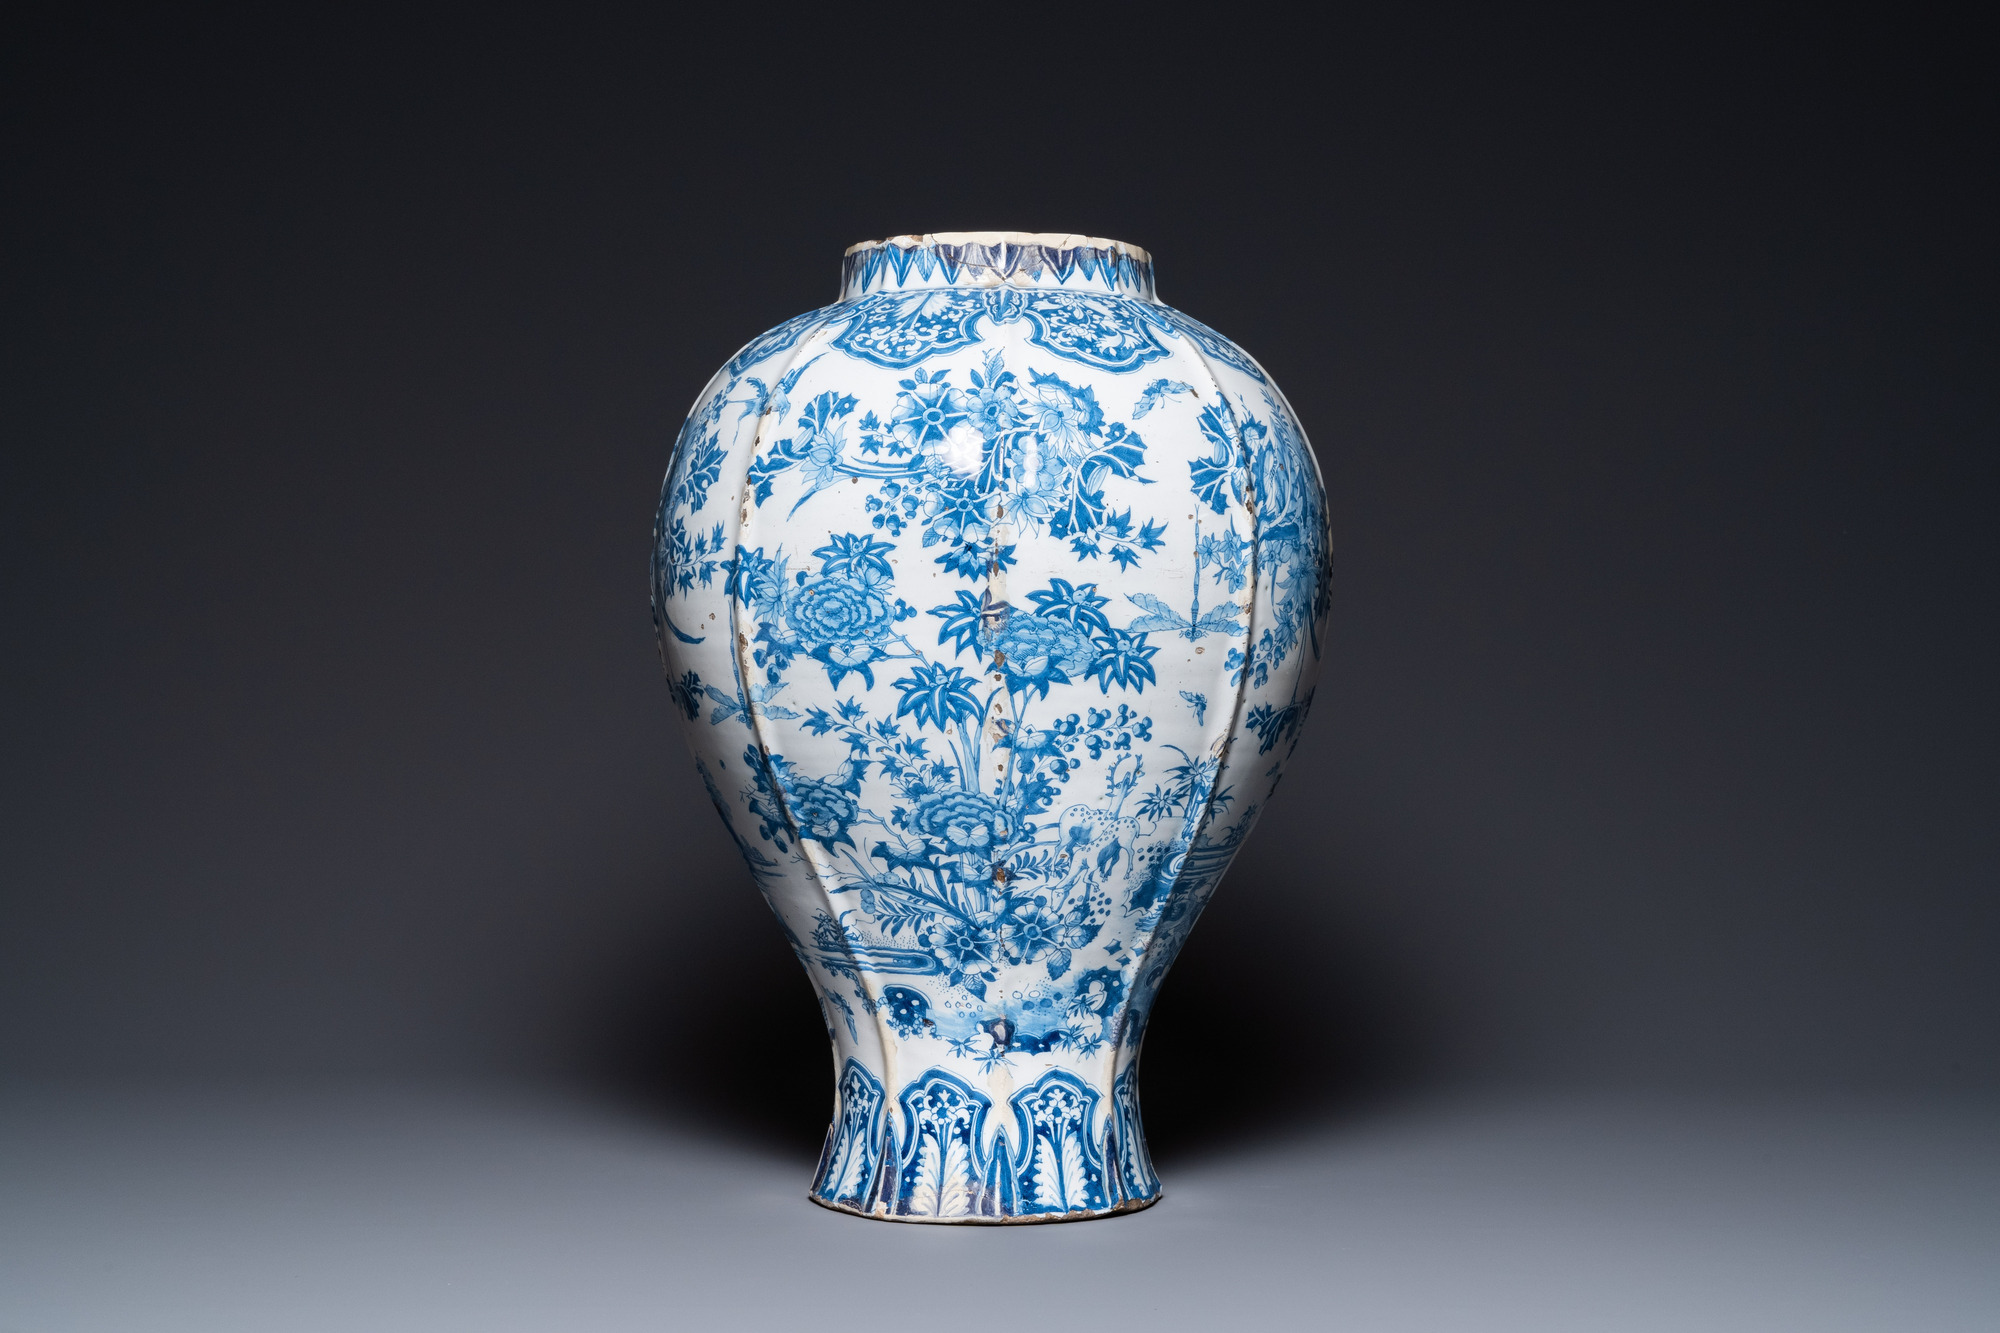 An exceptionally large blue and white baluster vase with naturalistic design, Delft or Frankfurt, la